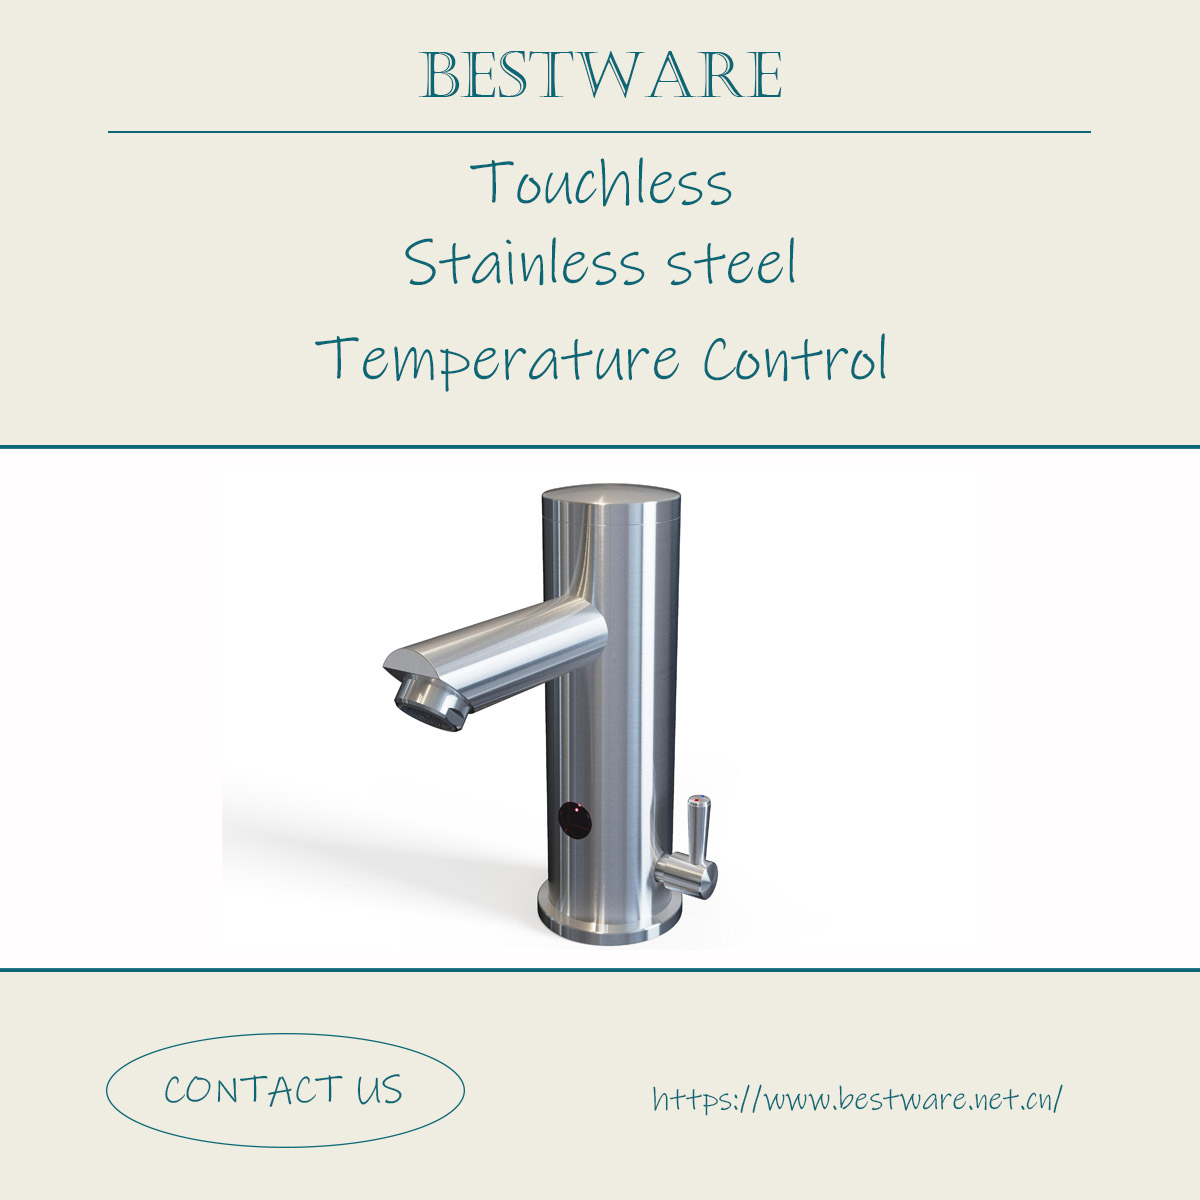 Reduce project costs by reducing maintenance costs!
The Bestware sets the standard for stainless steel 304 faucets, boasting a no-rust compared to brass units.
#stainlesssteel #kitchenfauet #kitchenaccesories #touchless #sensortap #kfc #mcdonalds #faucet #hotels